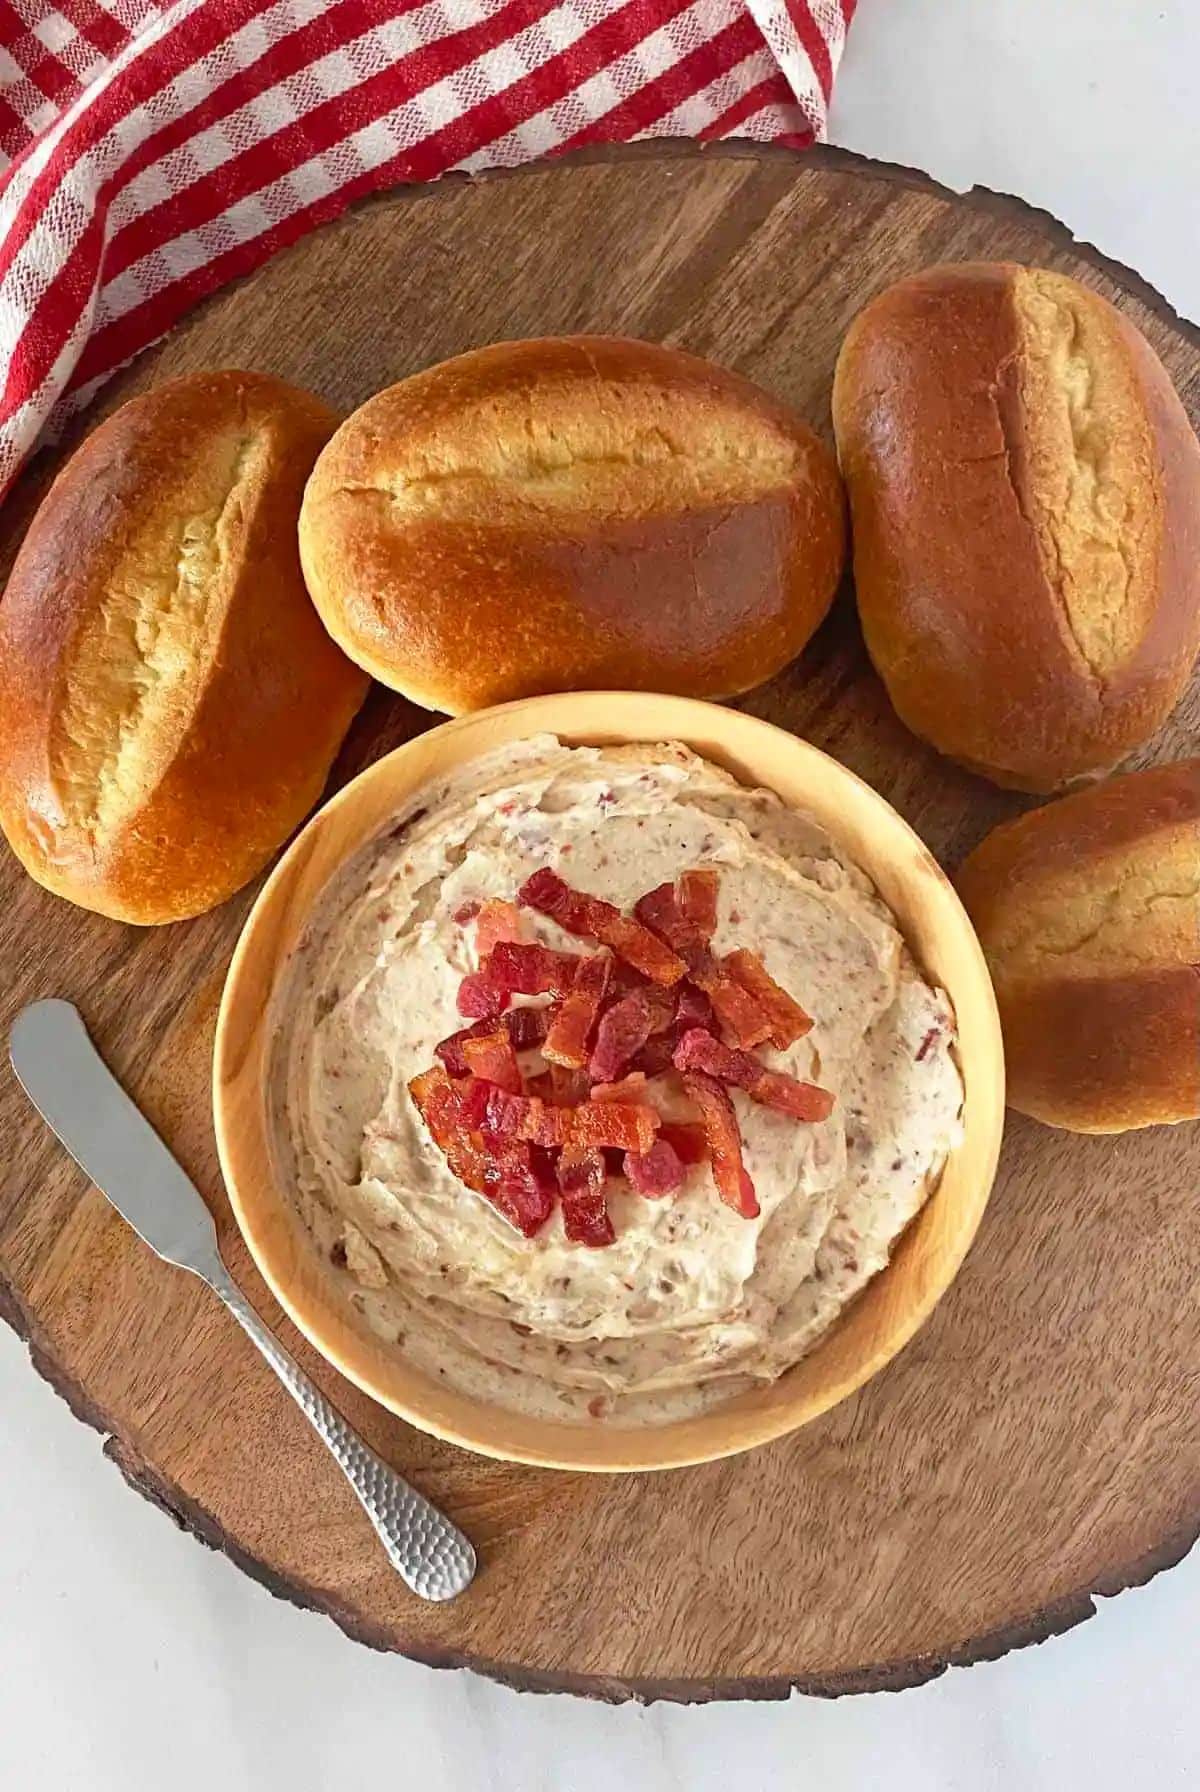 A bowl of Bacon Butter on a wooden tray with a knife and loafs of bread.